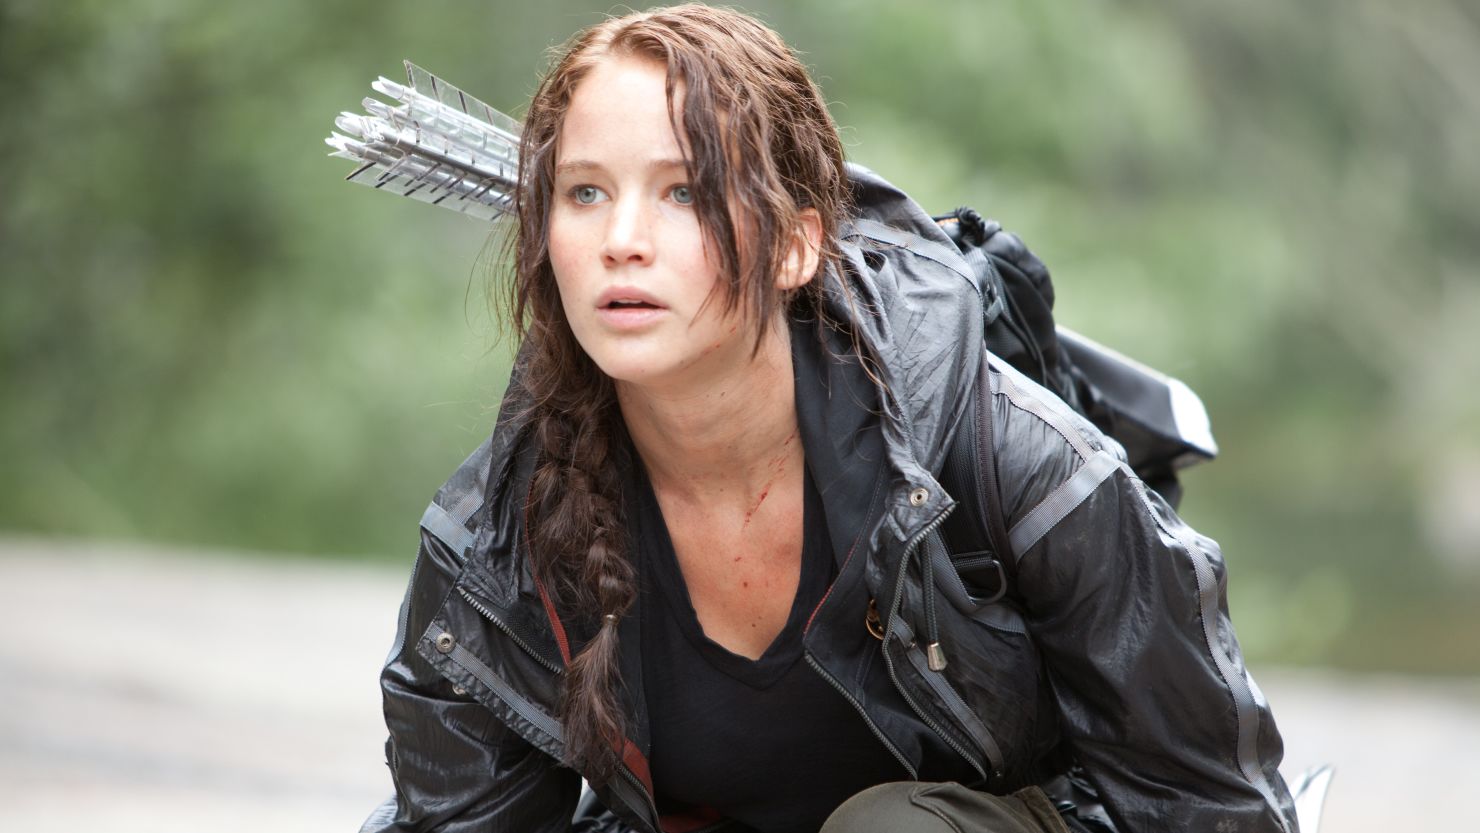 Jennifer Lawrence stars as "The Hunger Games" heroine Katniss Everdeen, who is an excellent archer.